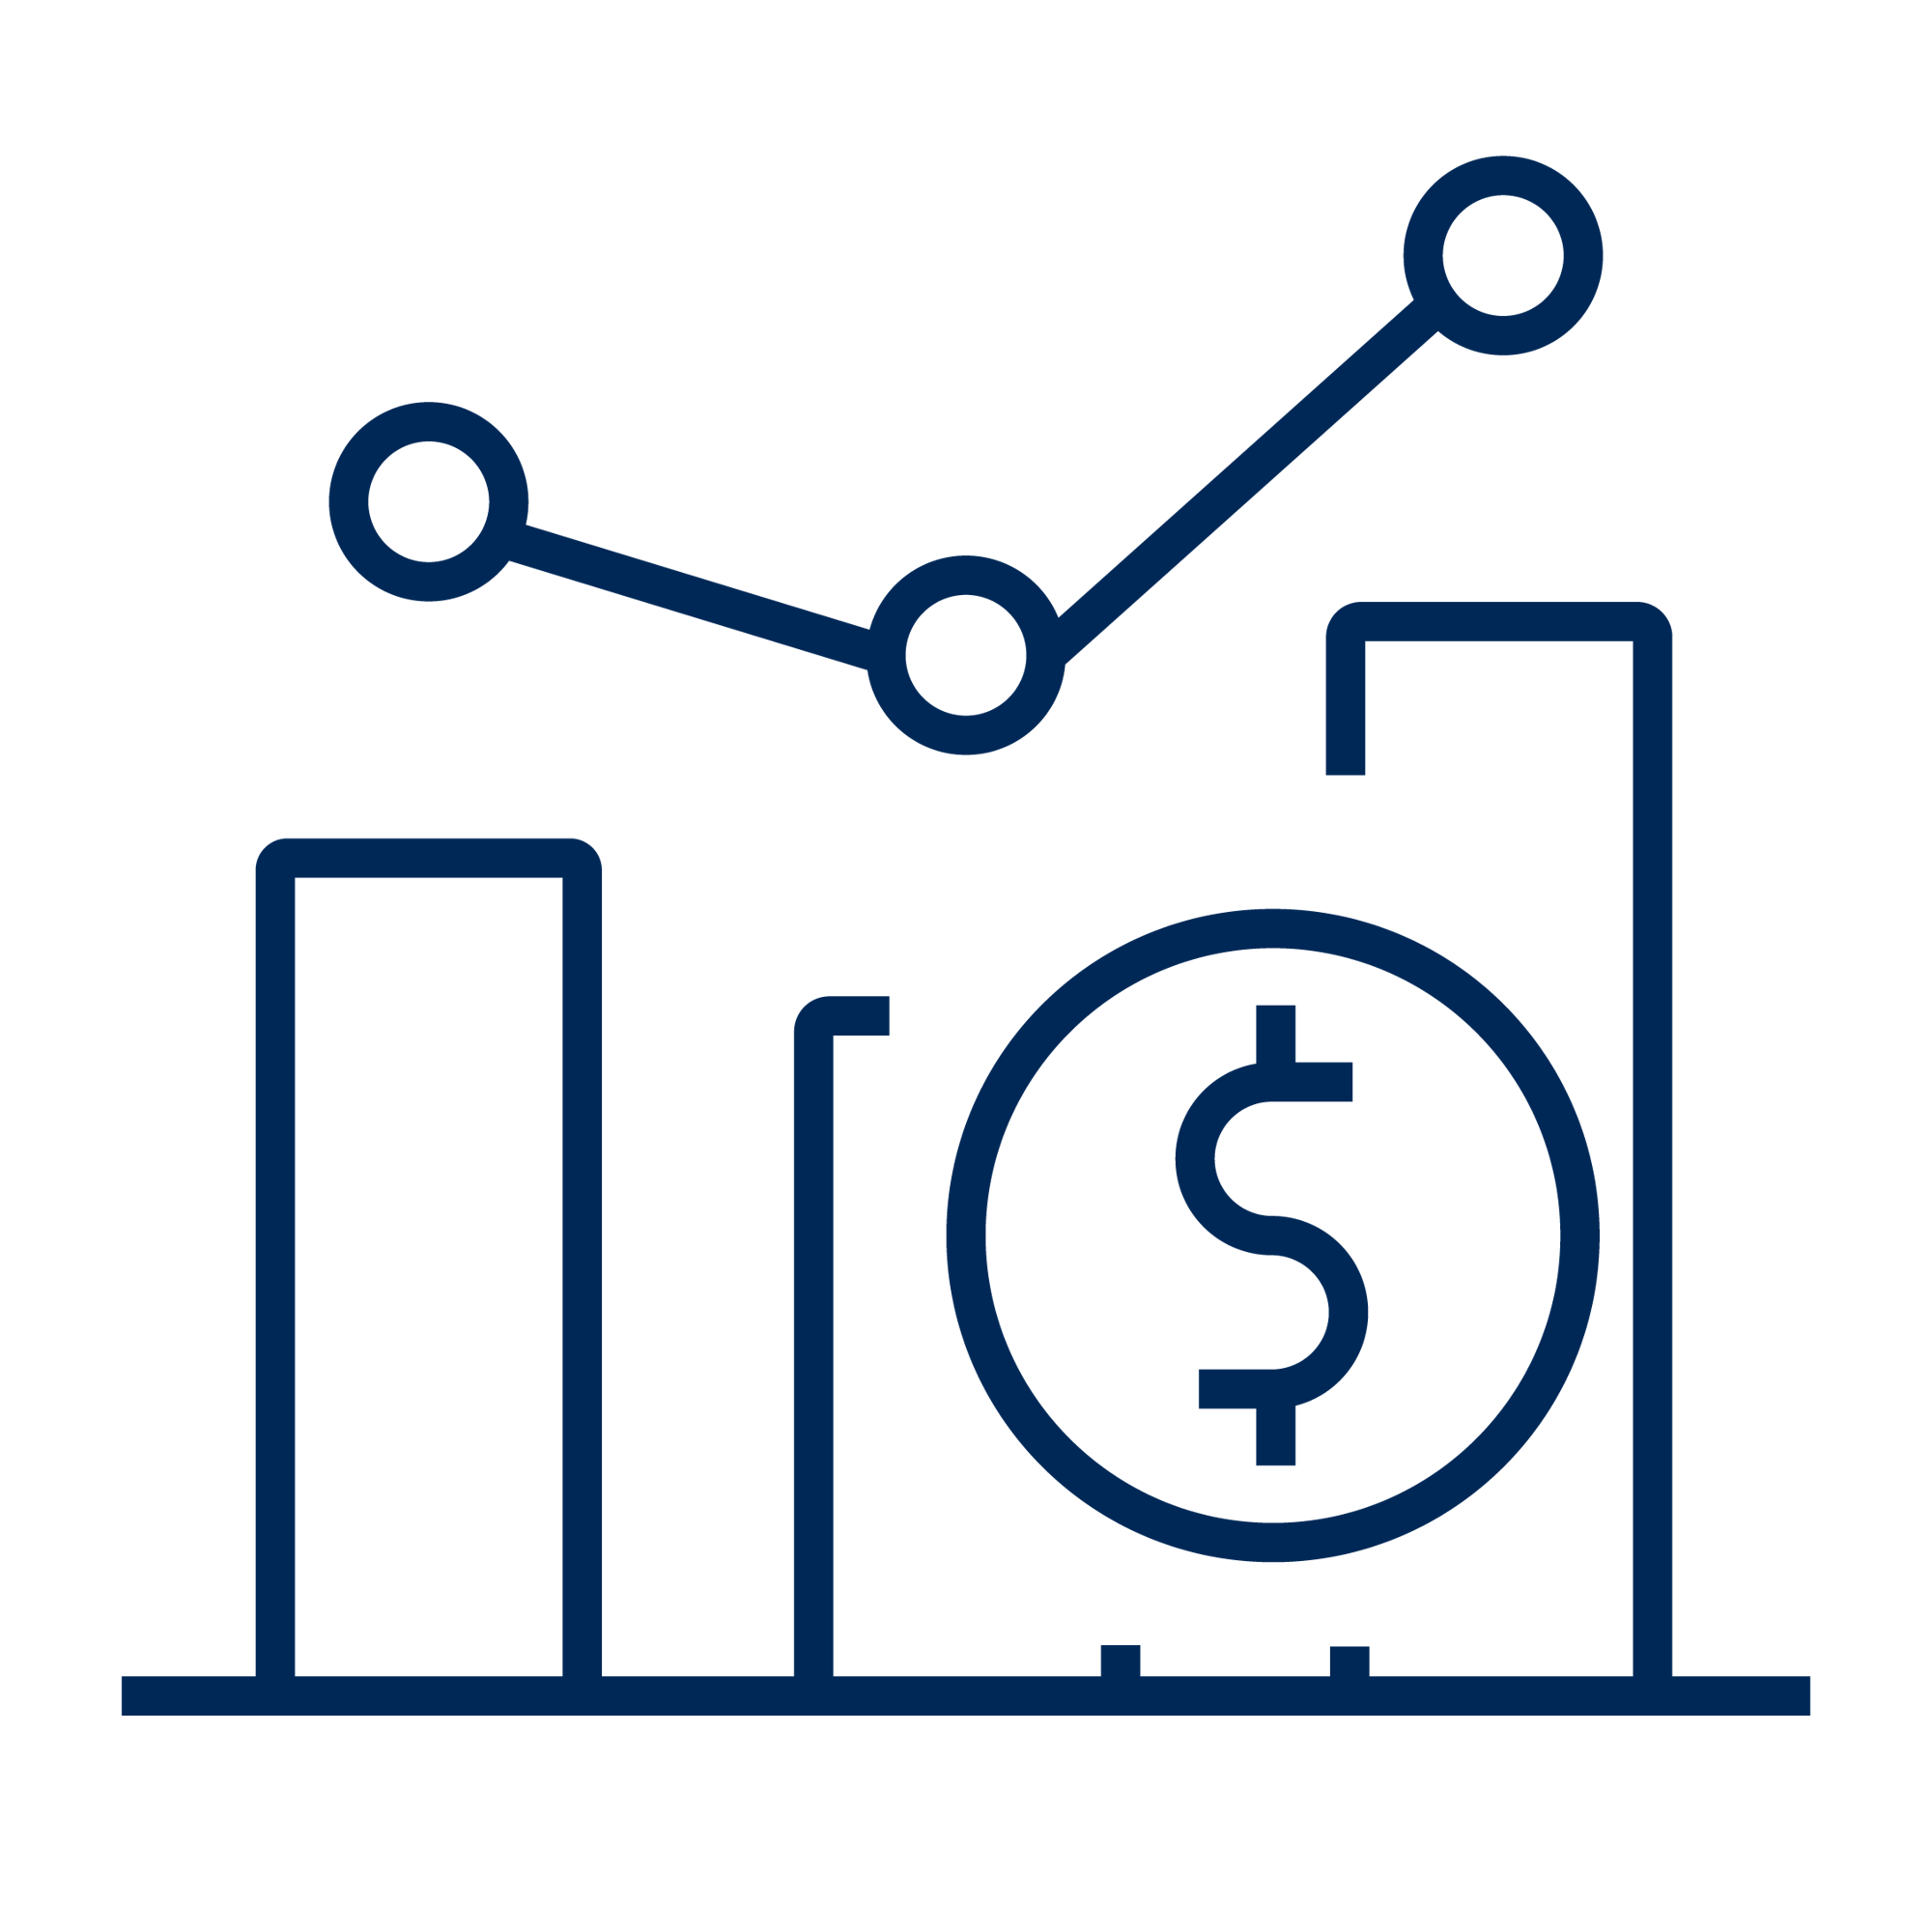 introduction to performance based budgeting concepts